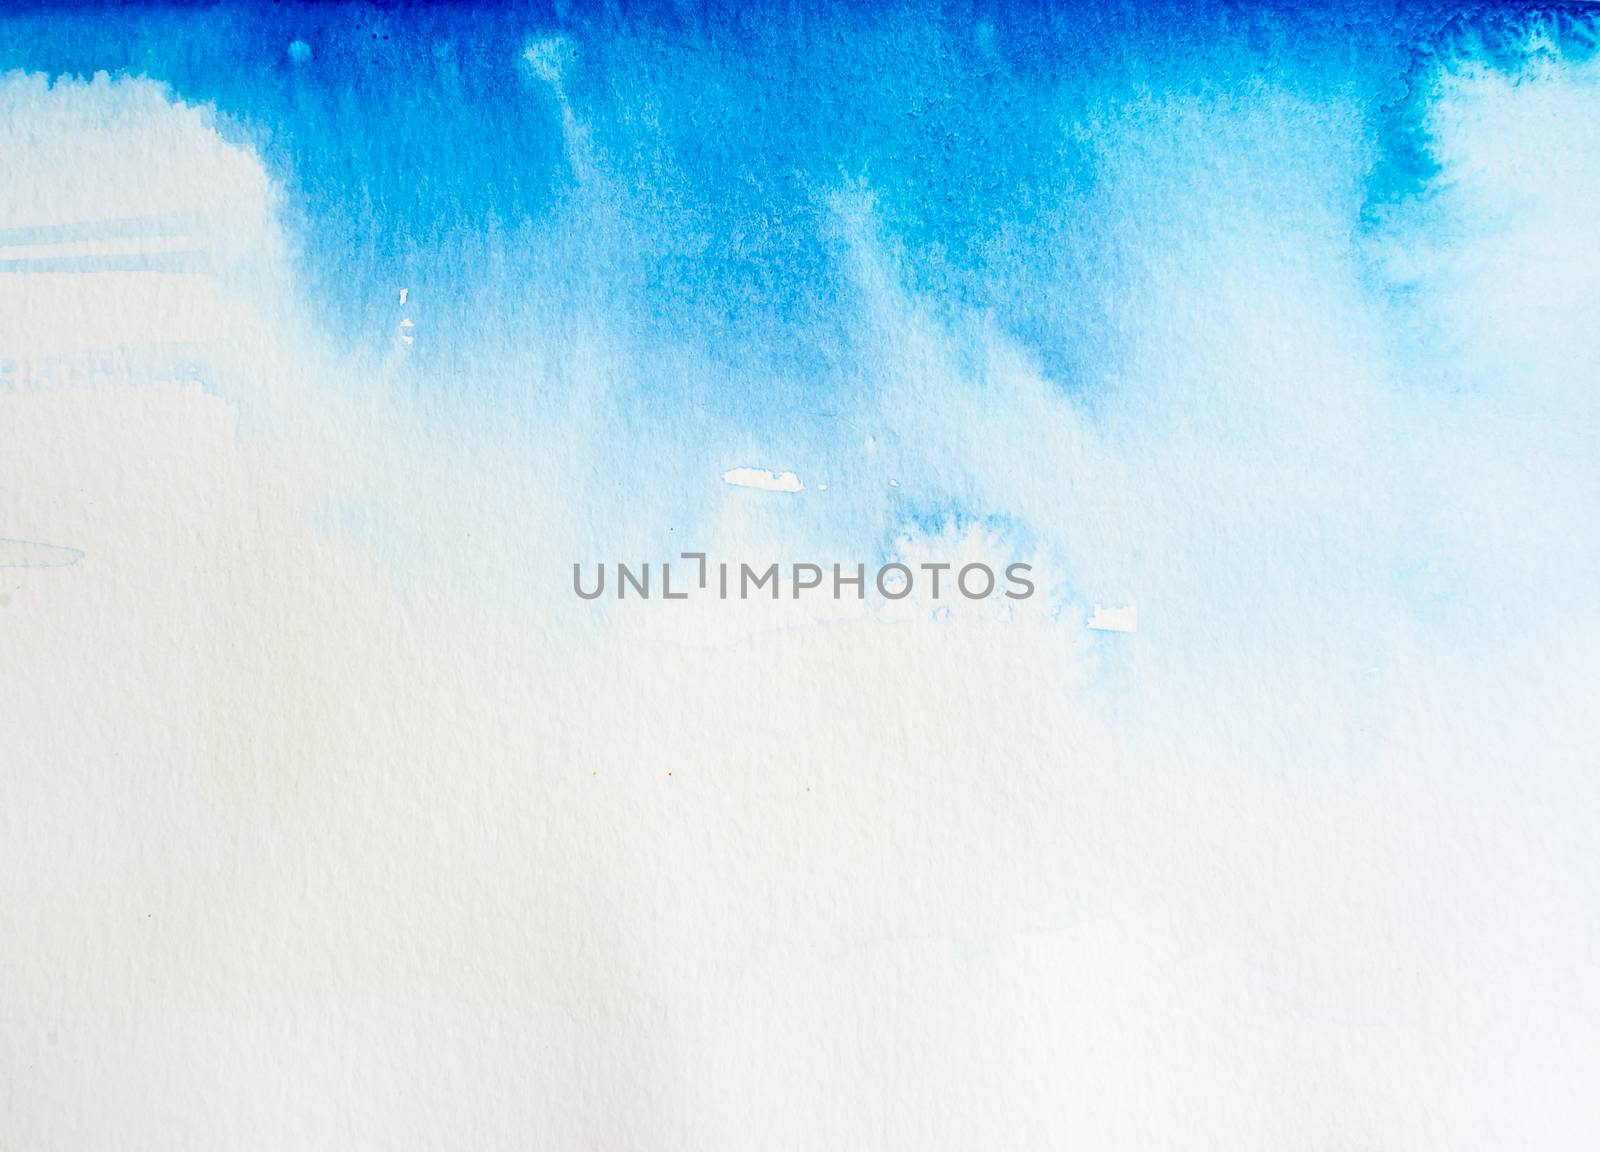 Watercolor background Heavens. Abstract blue textured watercolor background with whirls and splashes fading into white copy space on the bottom.